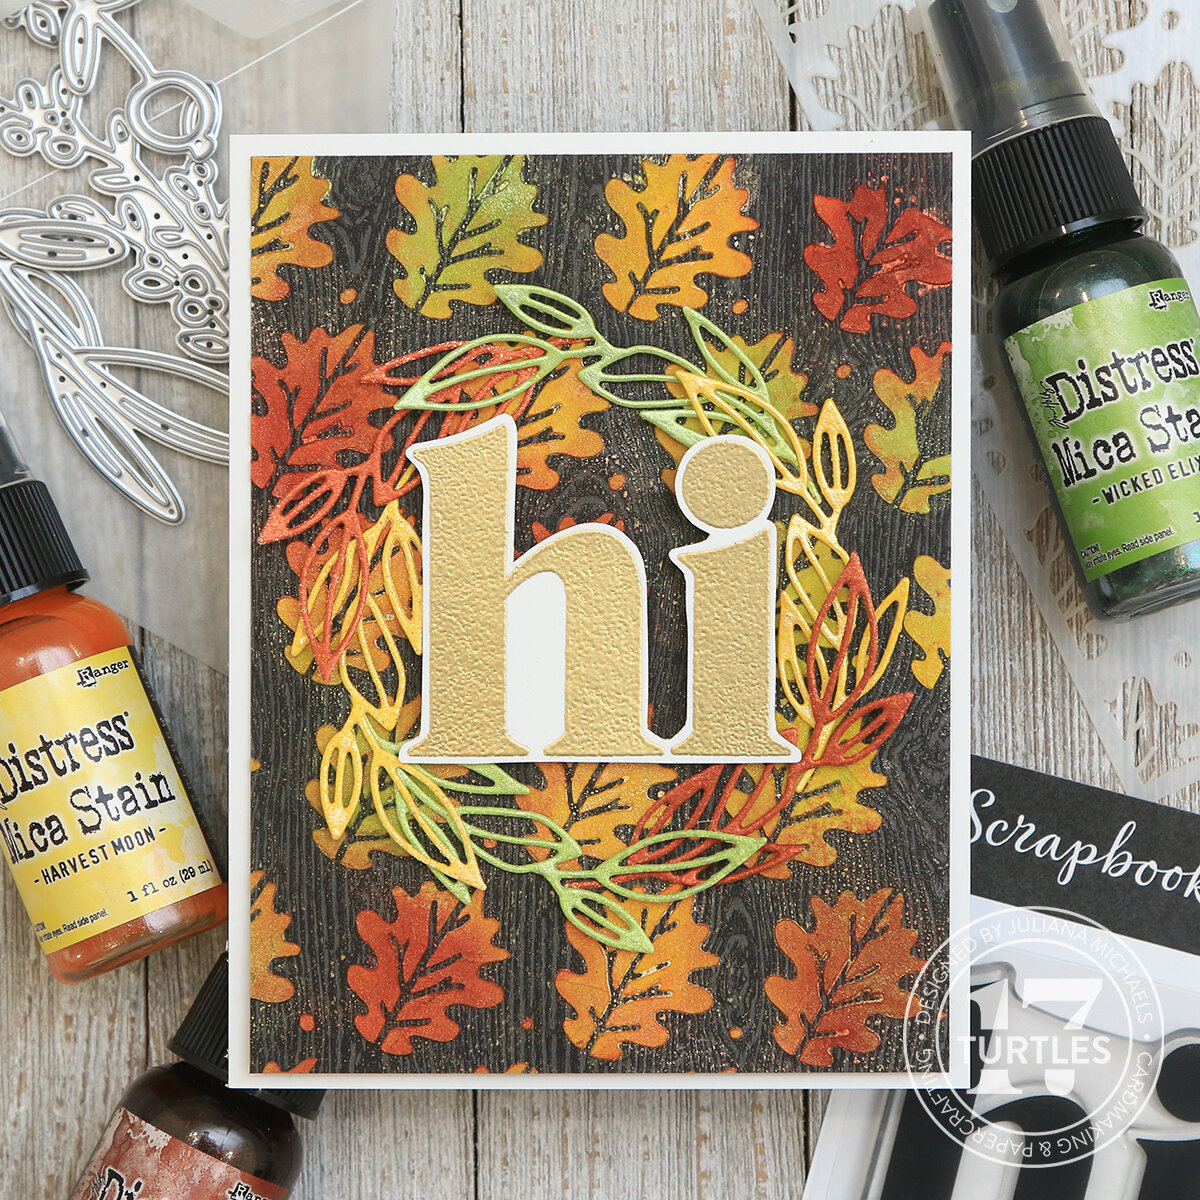  Clear Photopolymer Stamp Set - Hi Family and Fall